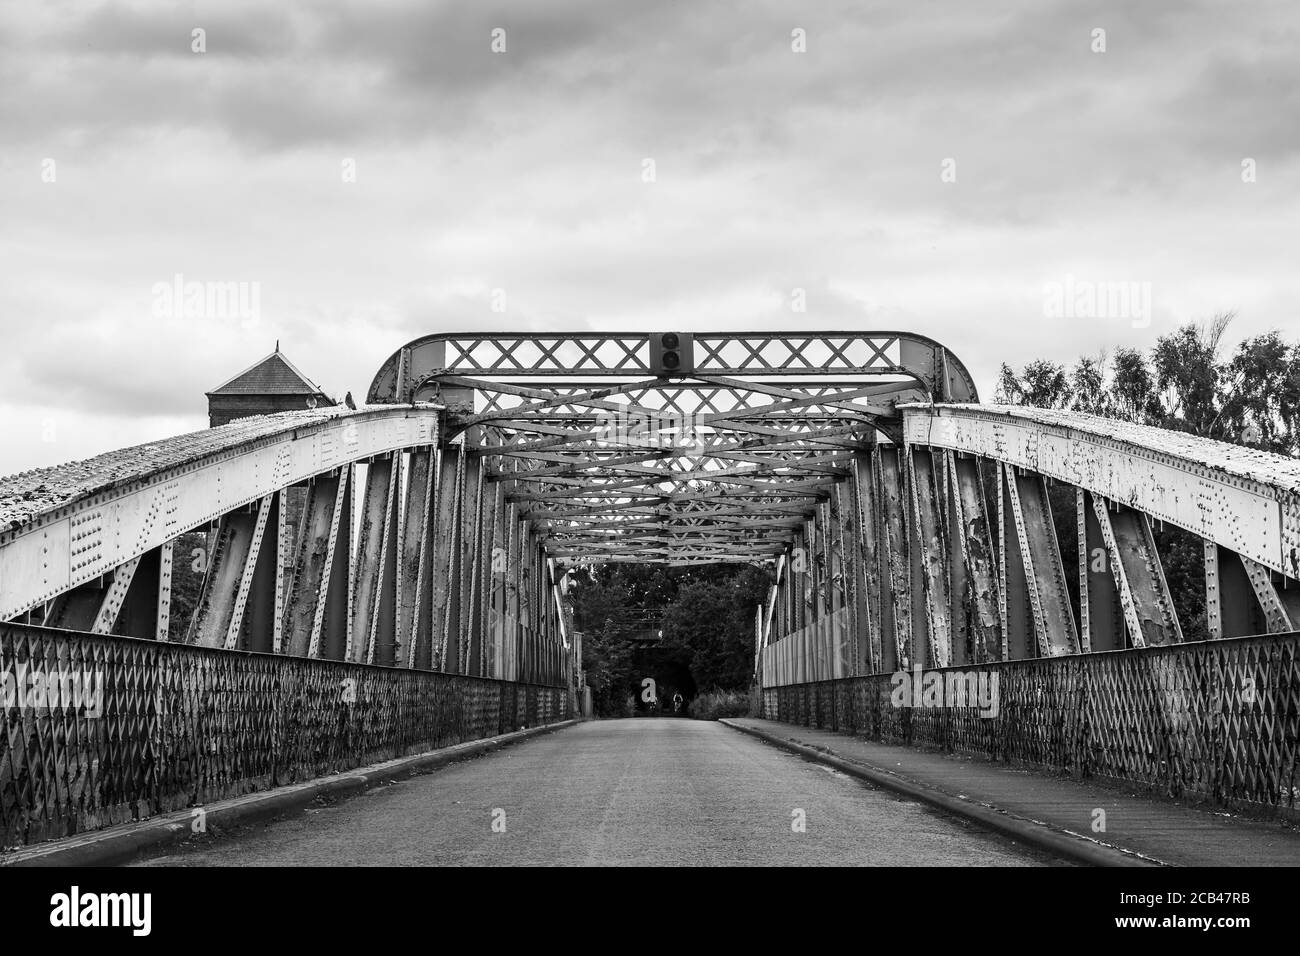 Moore Lane swing bridge in monochrome seen spanning the Manchester Ship Canal in Cheshire, England in August 2020. Stock Photo